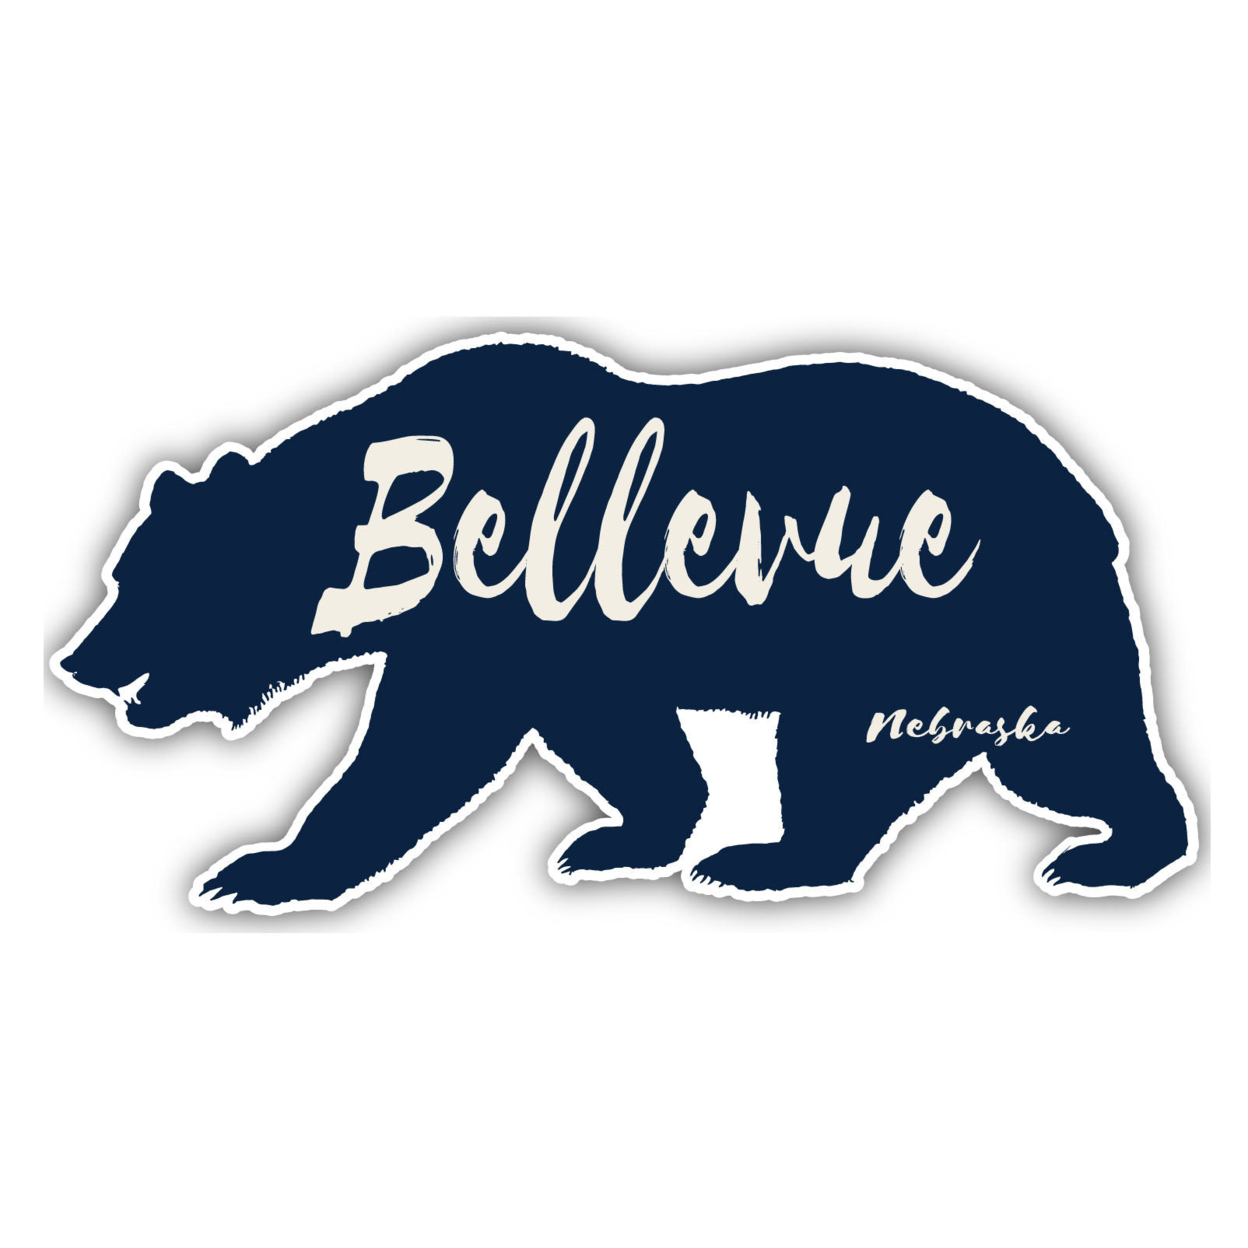 Bellevue Nebraska Souvenir Decorative Stickers (Choose Theme And Size) - 4-Pack, 10-Inch, Great Outdoors